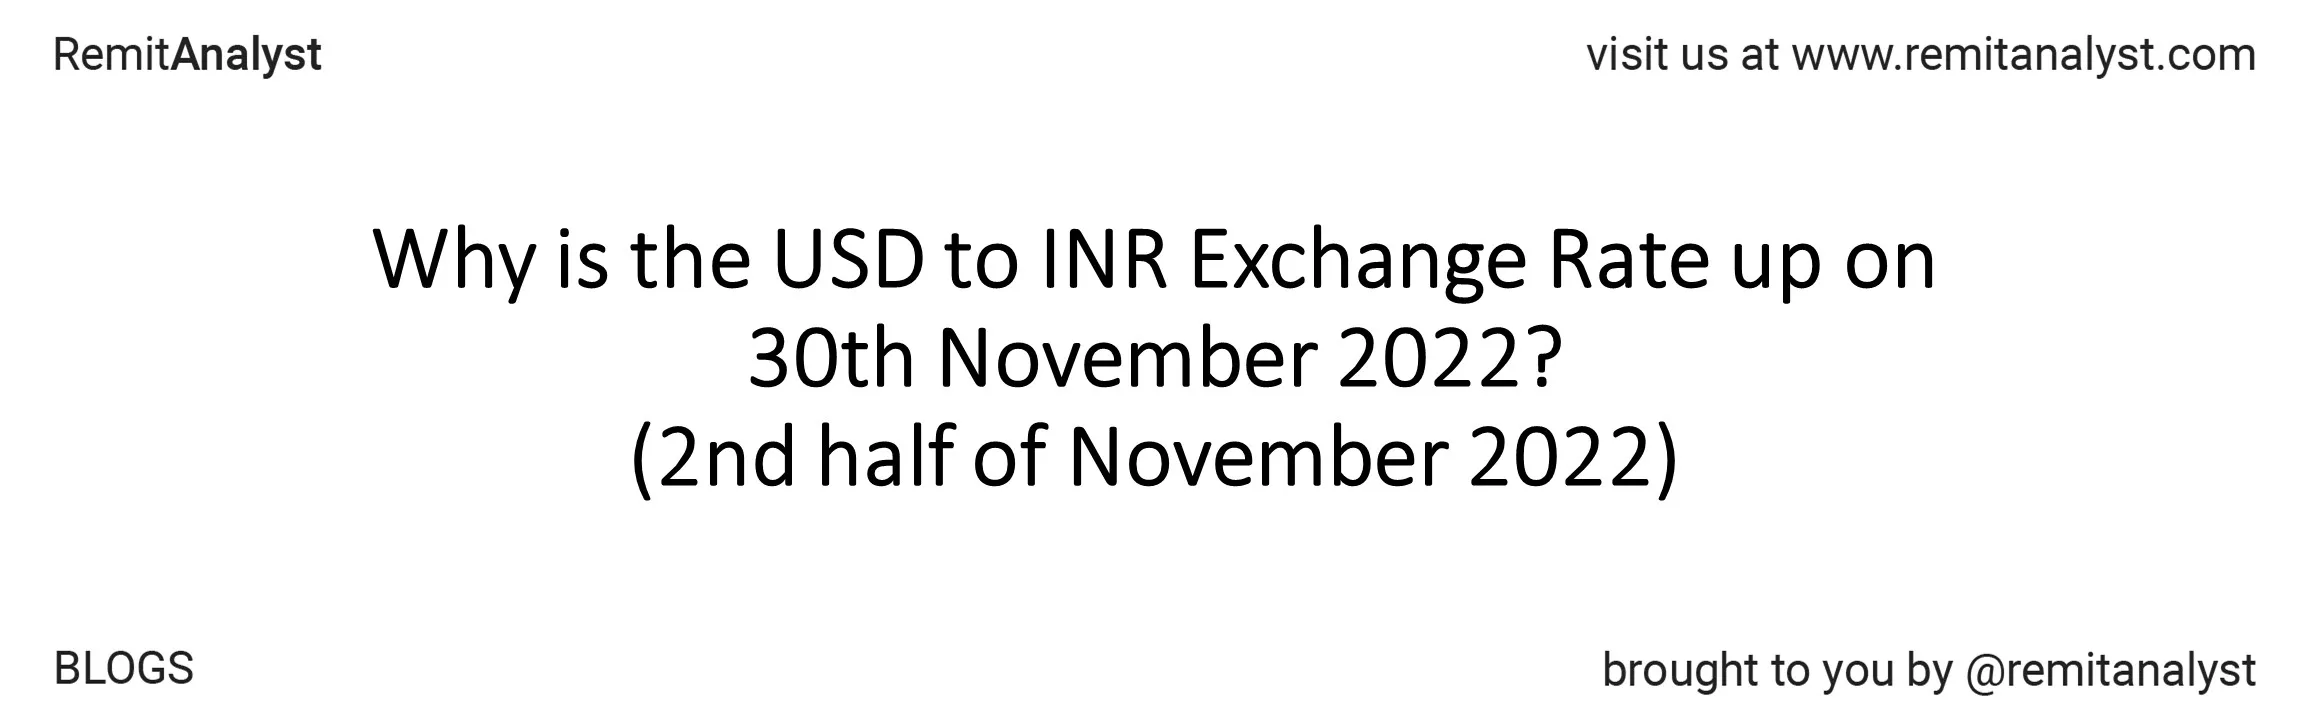 usd-to-inr-exchange-rate-16-nov-2022-to-30-nov-2022-title